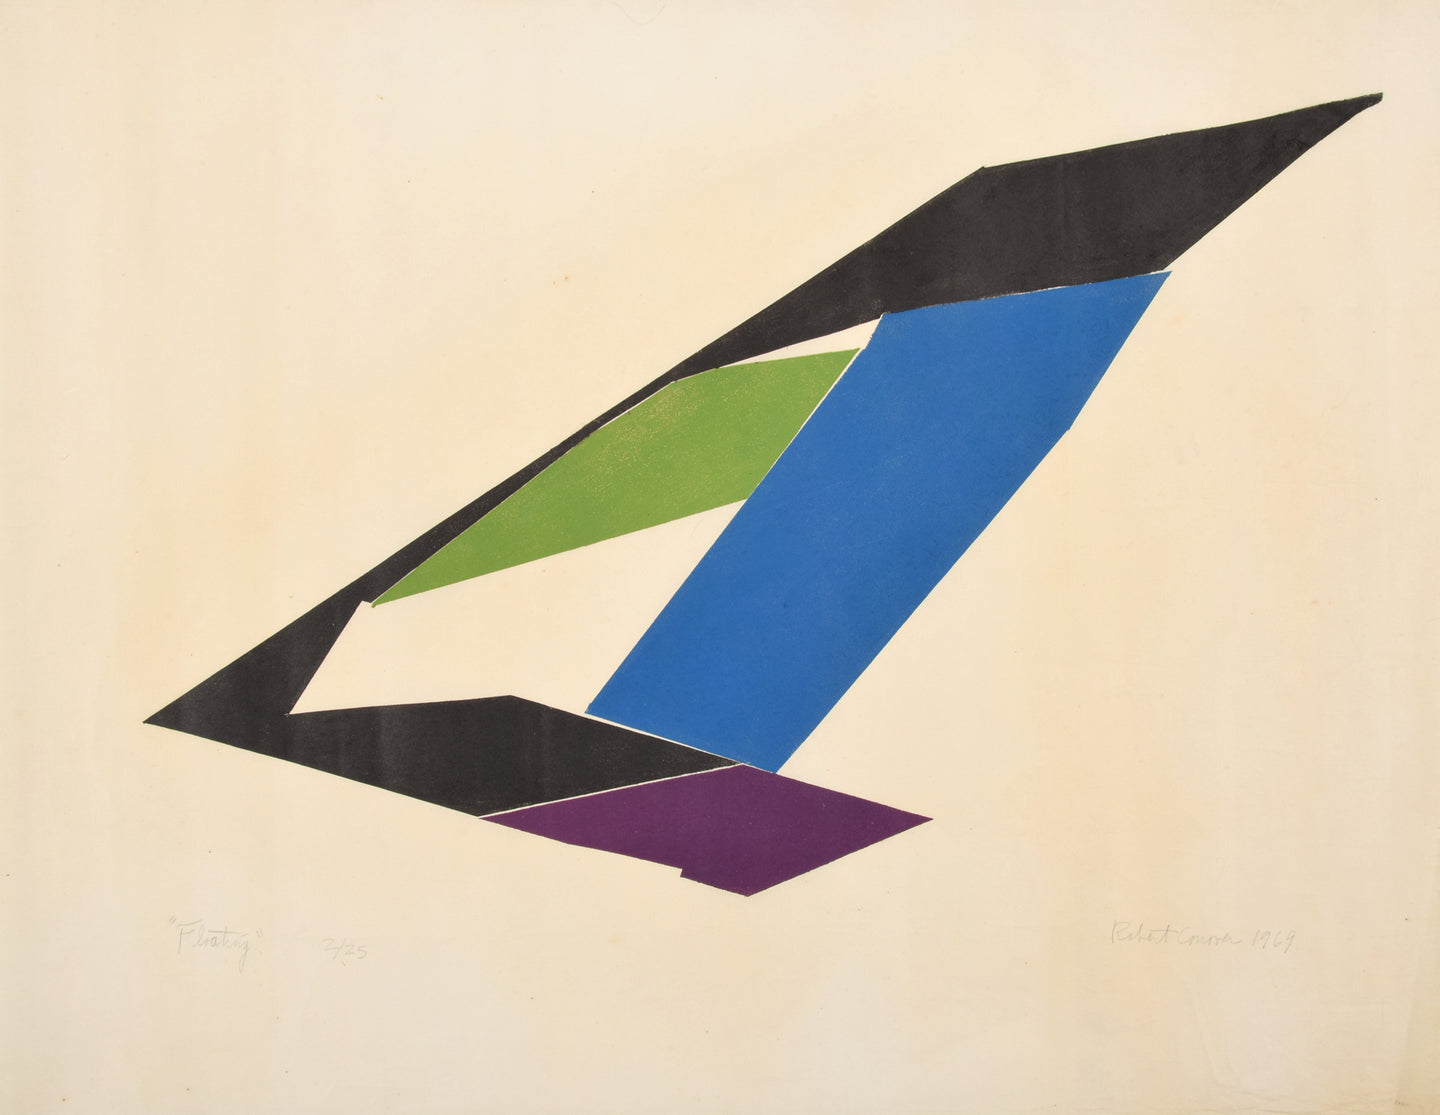 Robert Conover (1920-1988) Floating, 1969 Color Screenprint on paper 26.25 x 24.5 inches Edition 2/25 For sale at Manolis Projects Gallery, Miami, FL